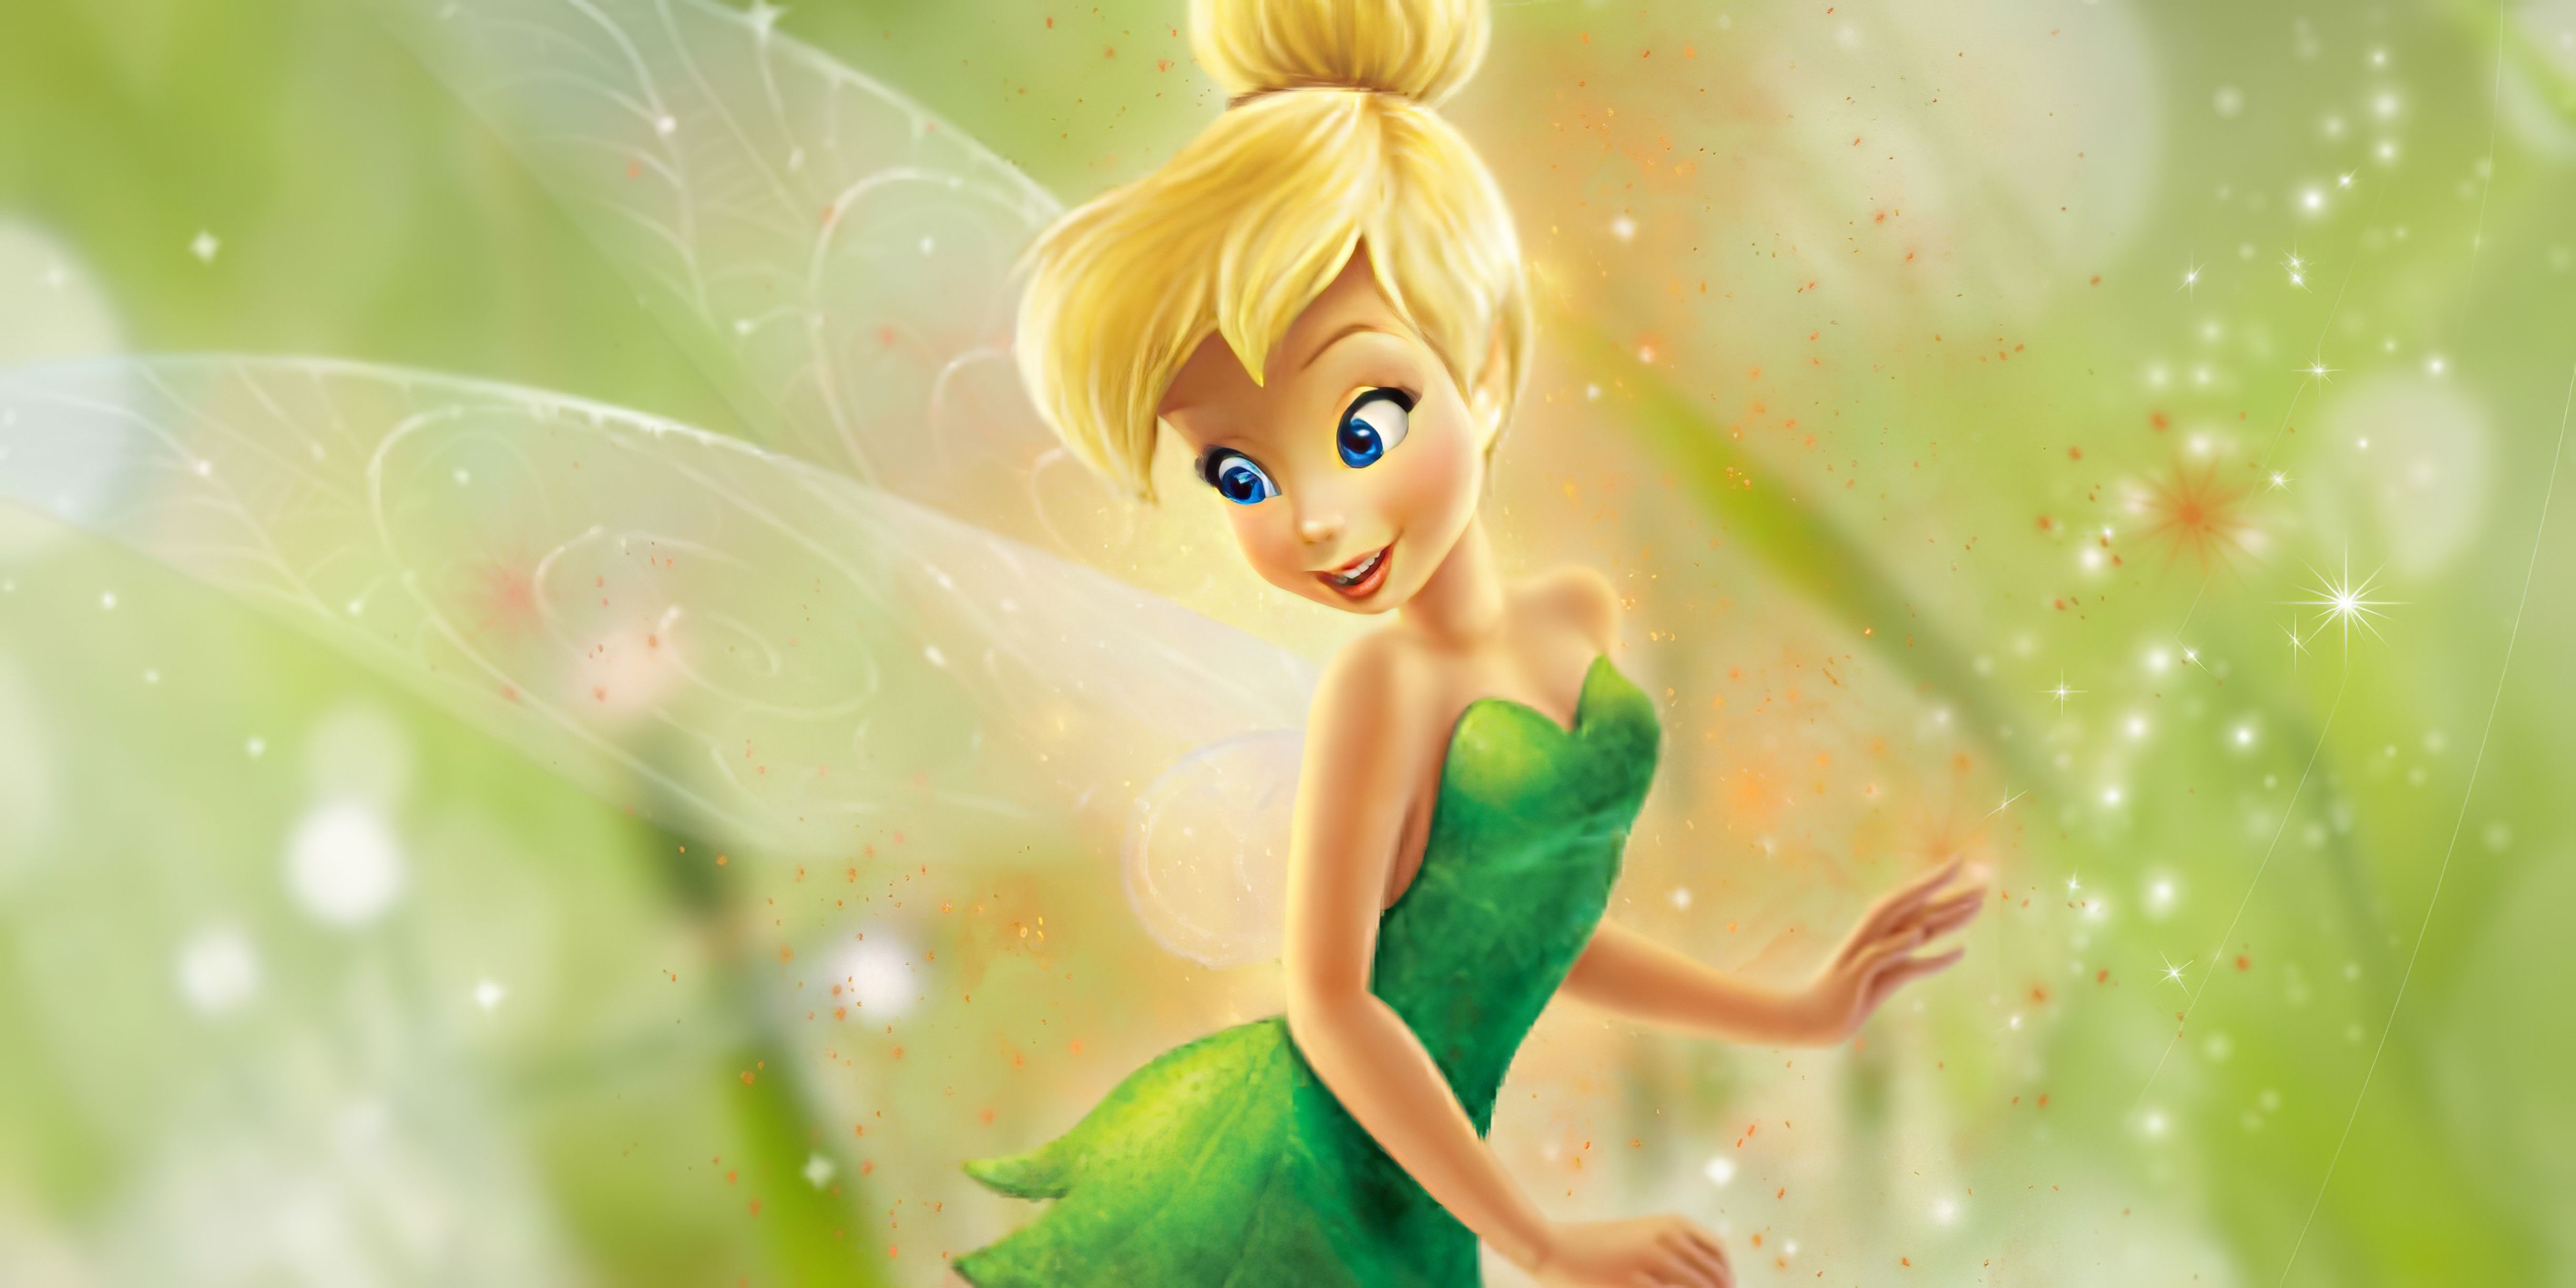 Tinker Bell fairies names and powers: Who is the most powerful